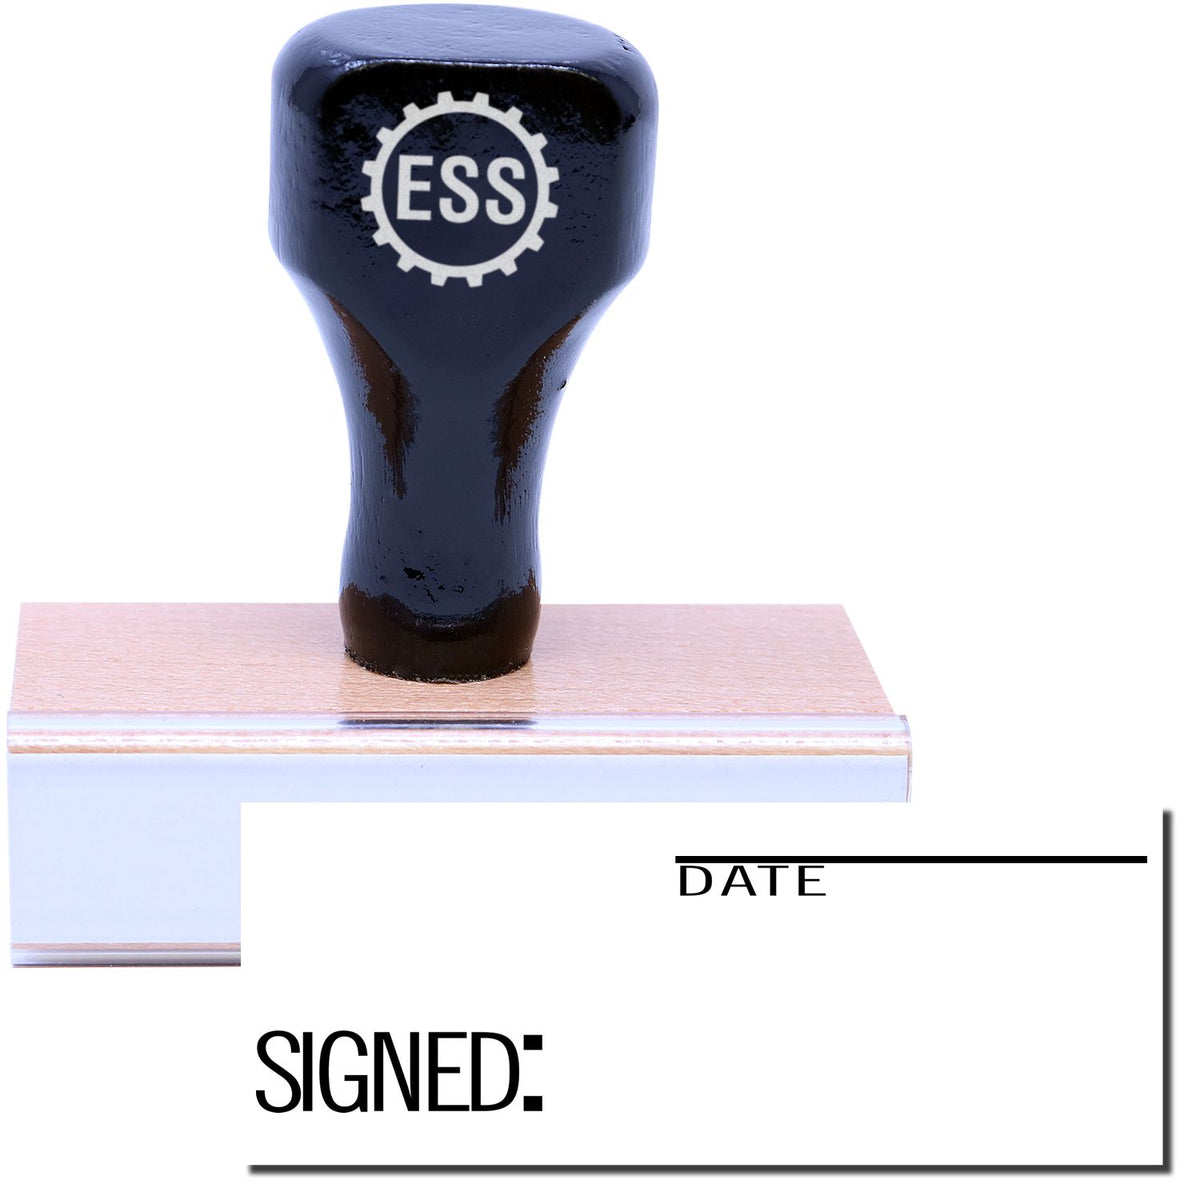 A stock office rubber stamp with a stamped image showing how the text &quot;SIGNED:&quot; (on the left bottom side) and &quot;DATE&quot; (on the right top side with a line above it) in a large font is displayed after stamping.